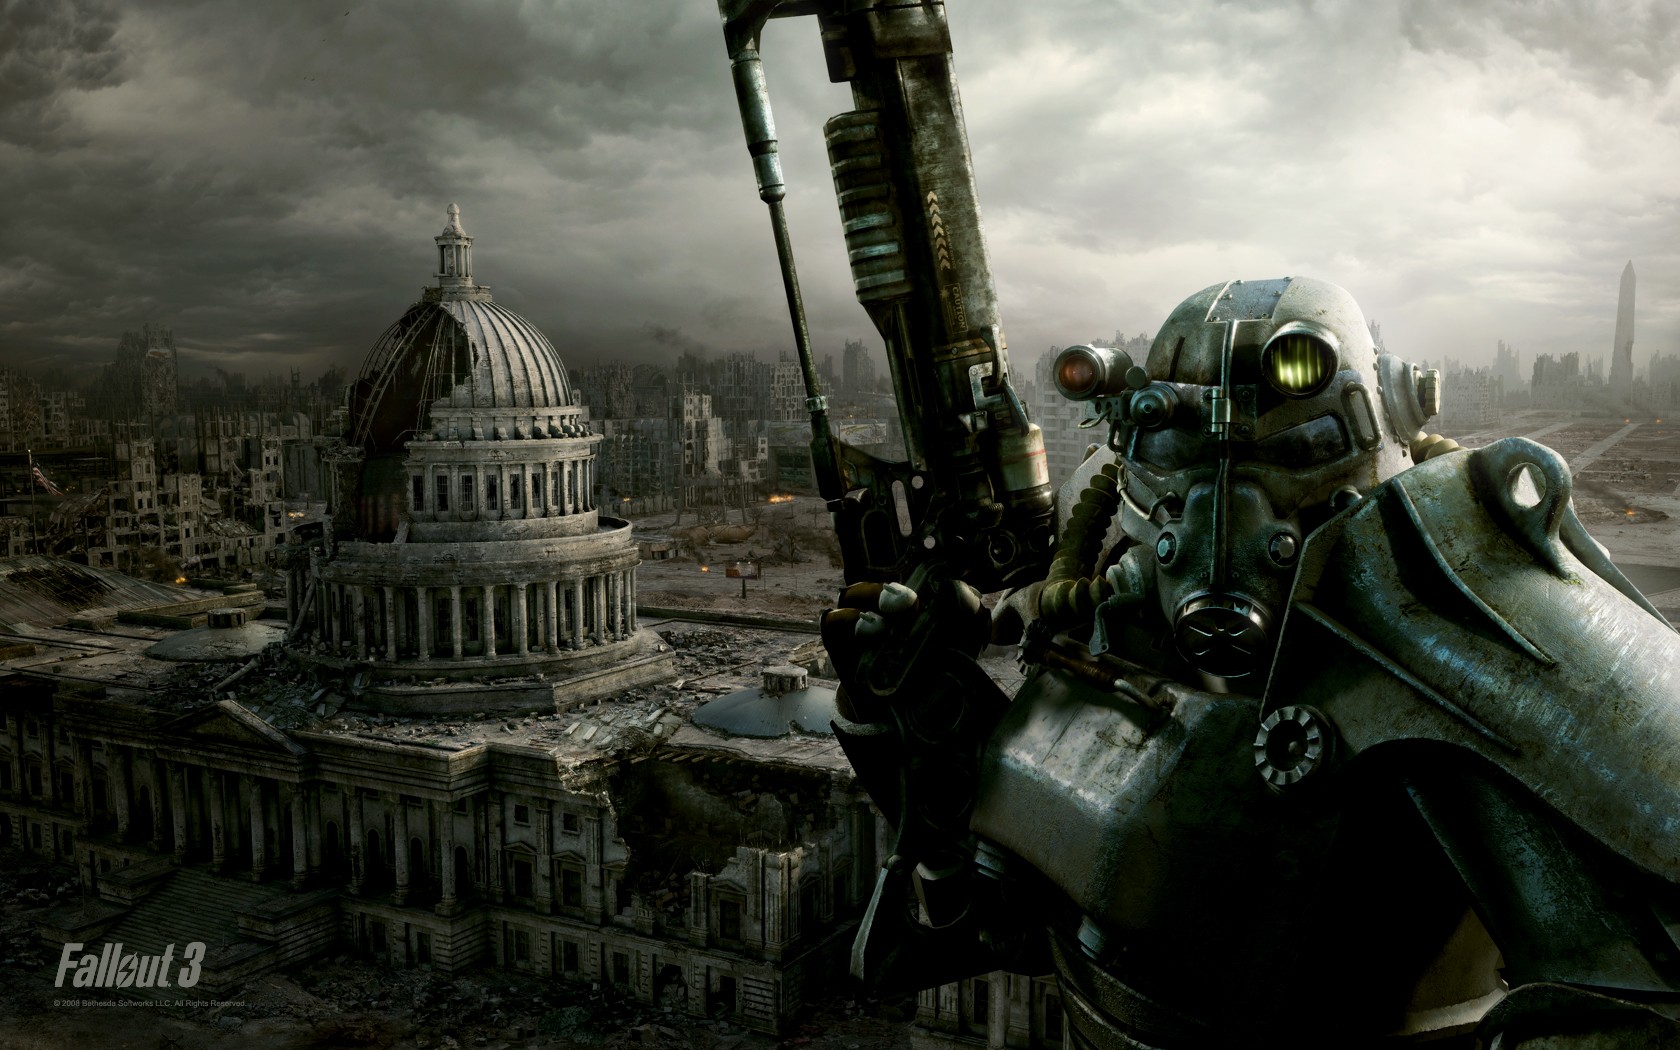 General 1680x1050 Fallout Fallout 3 video games apocalyptic Washington PC gaming video game art futuristic Bethesda Softworks 2008 (Year) ruins